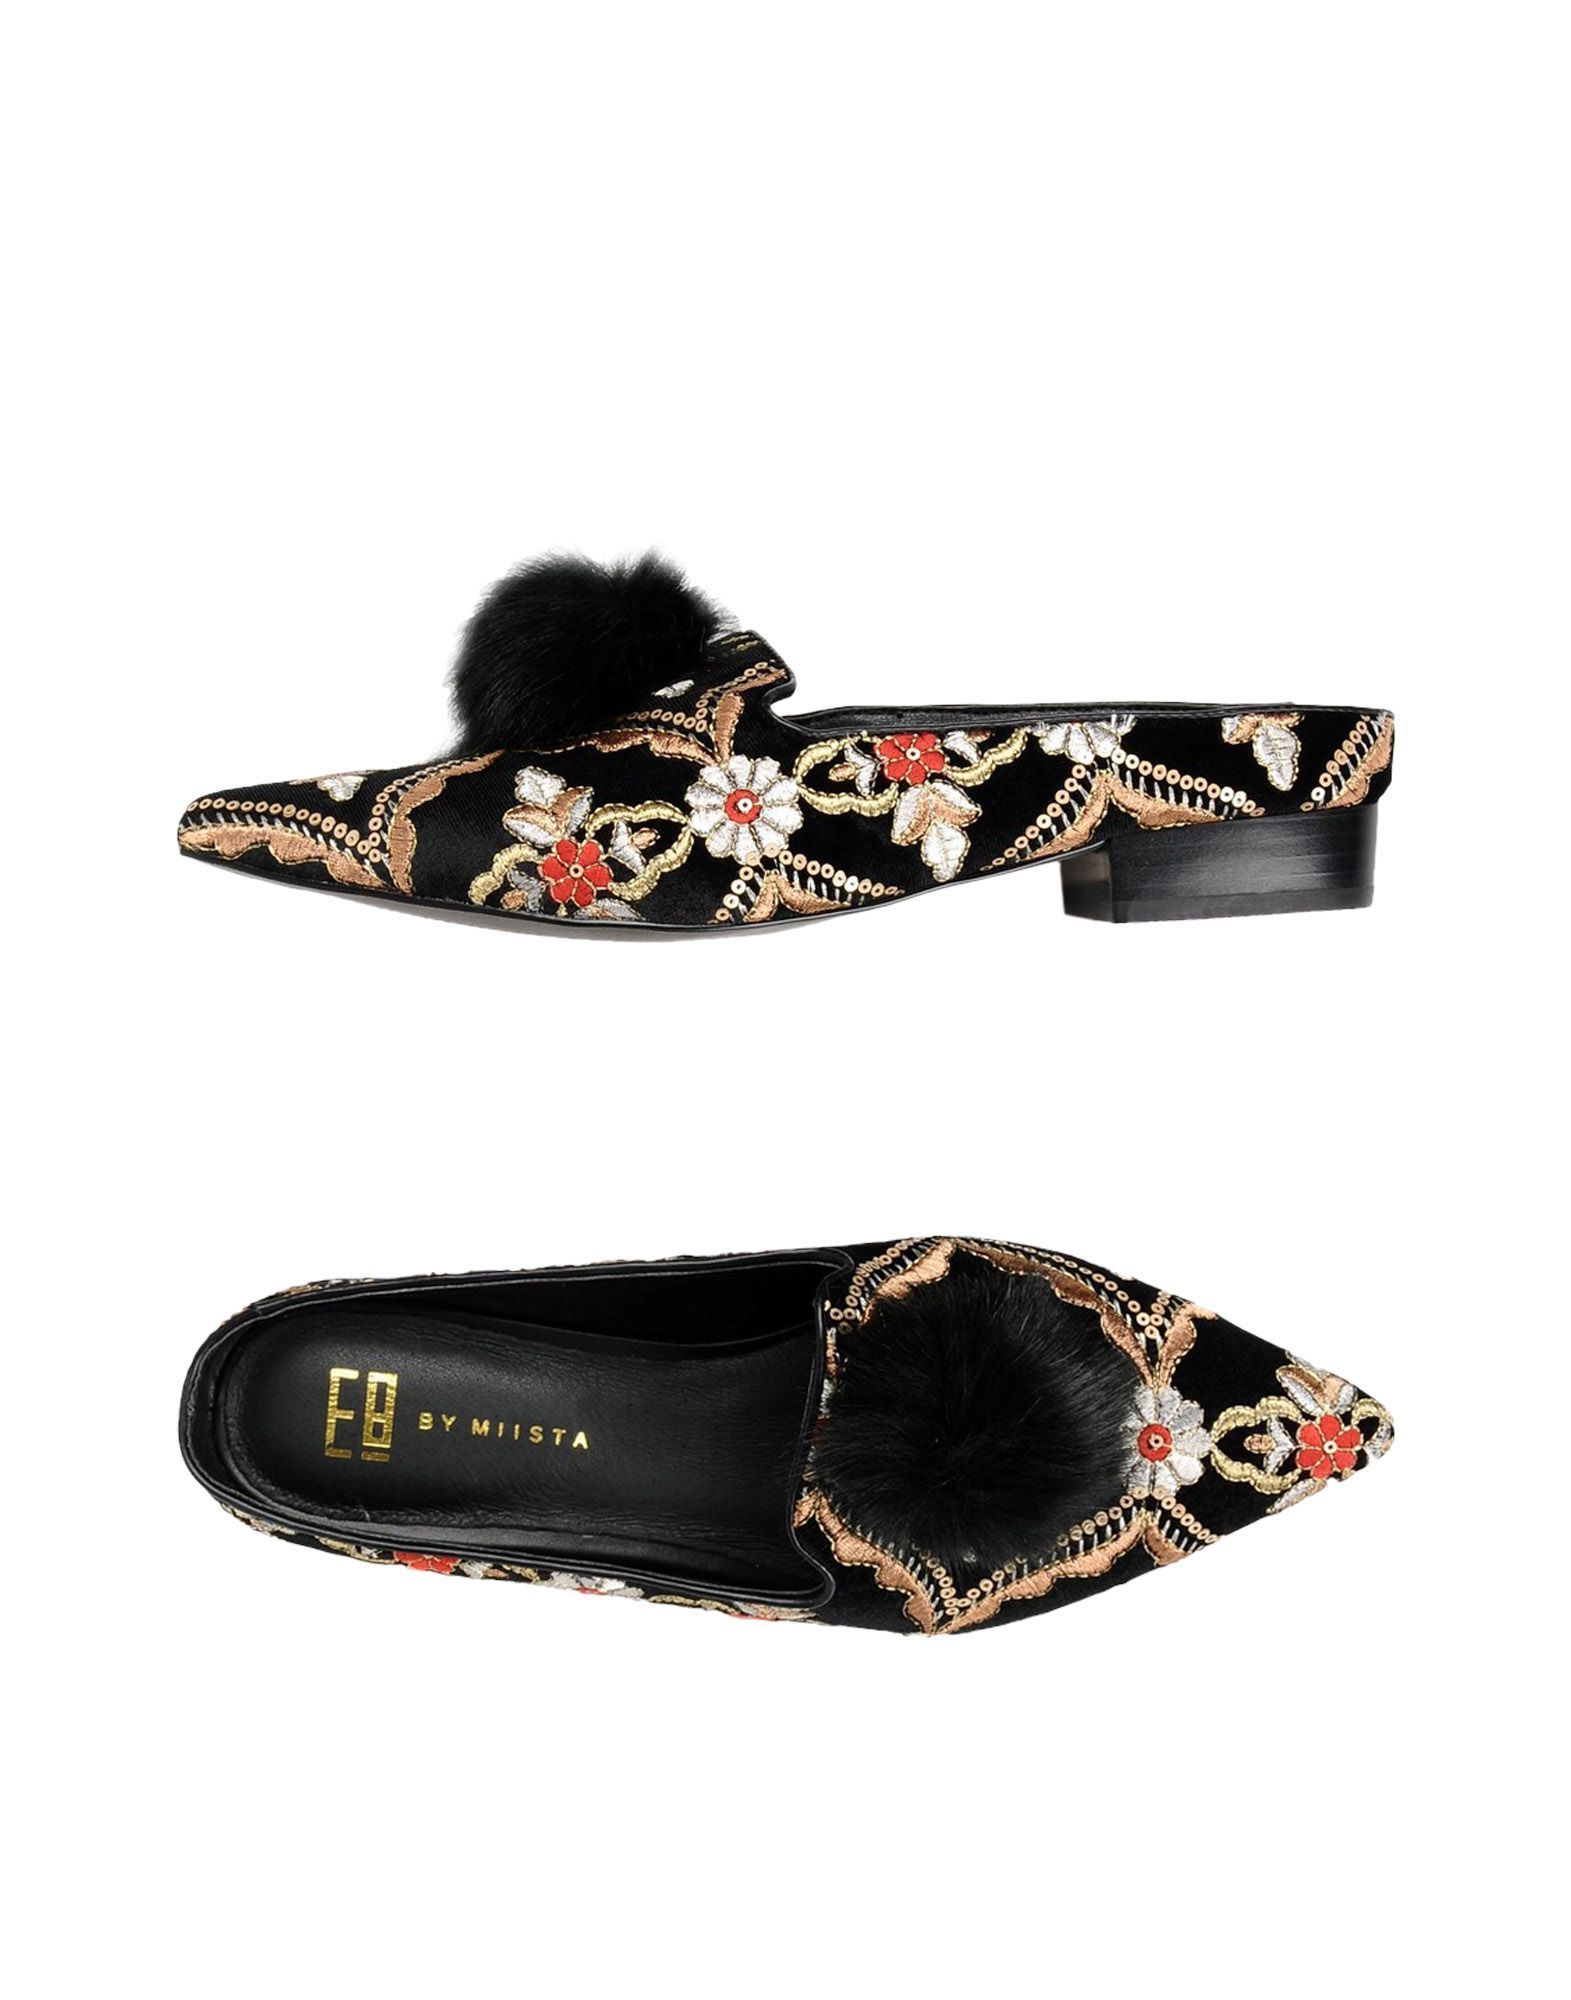 velvet, embroidered detailing, sequinned, multicolour pattern, narrow toeline, leather lining, rubber sole, square heel, mules